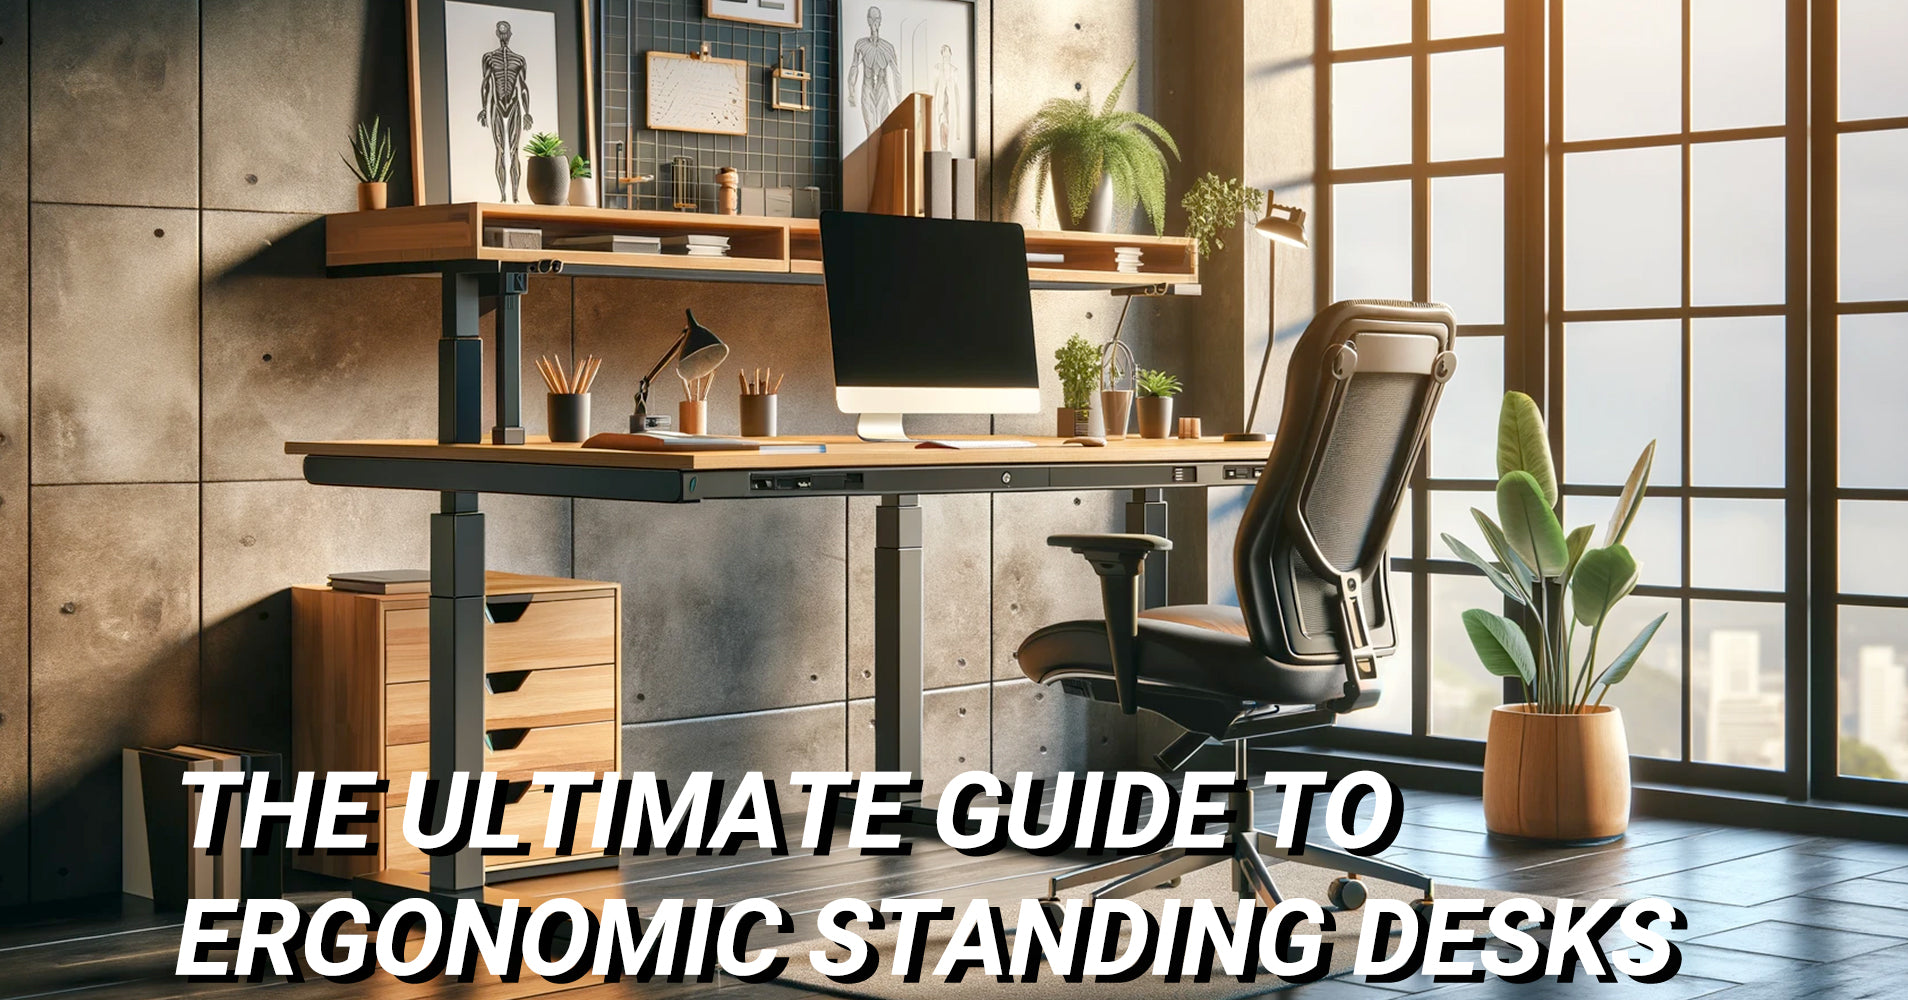 Revolutionize Your Workspace: The Ultimate Guide to Ergonomic Standing Desks